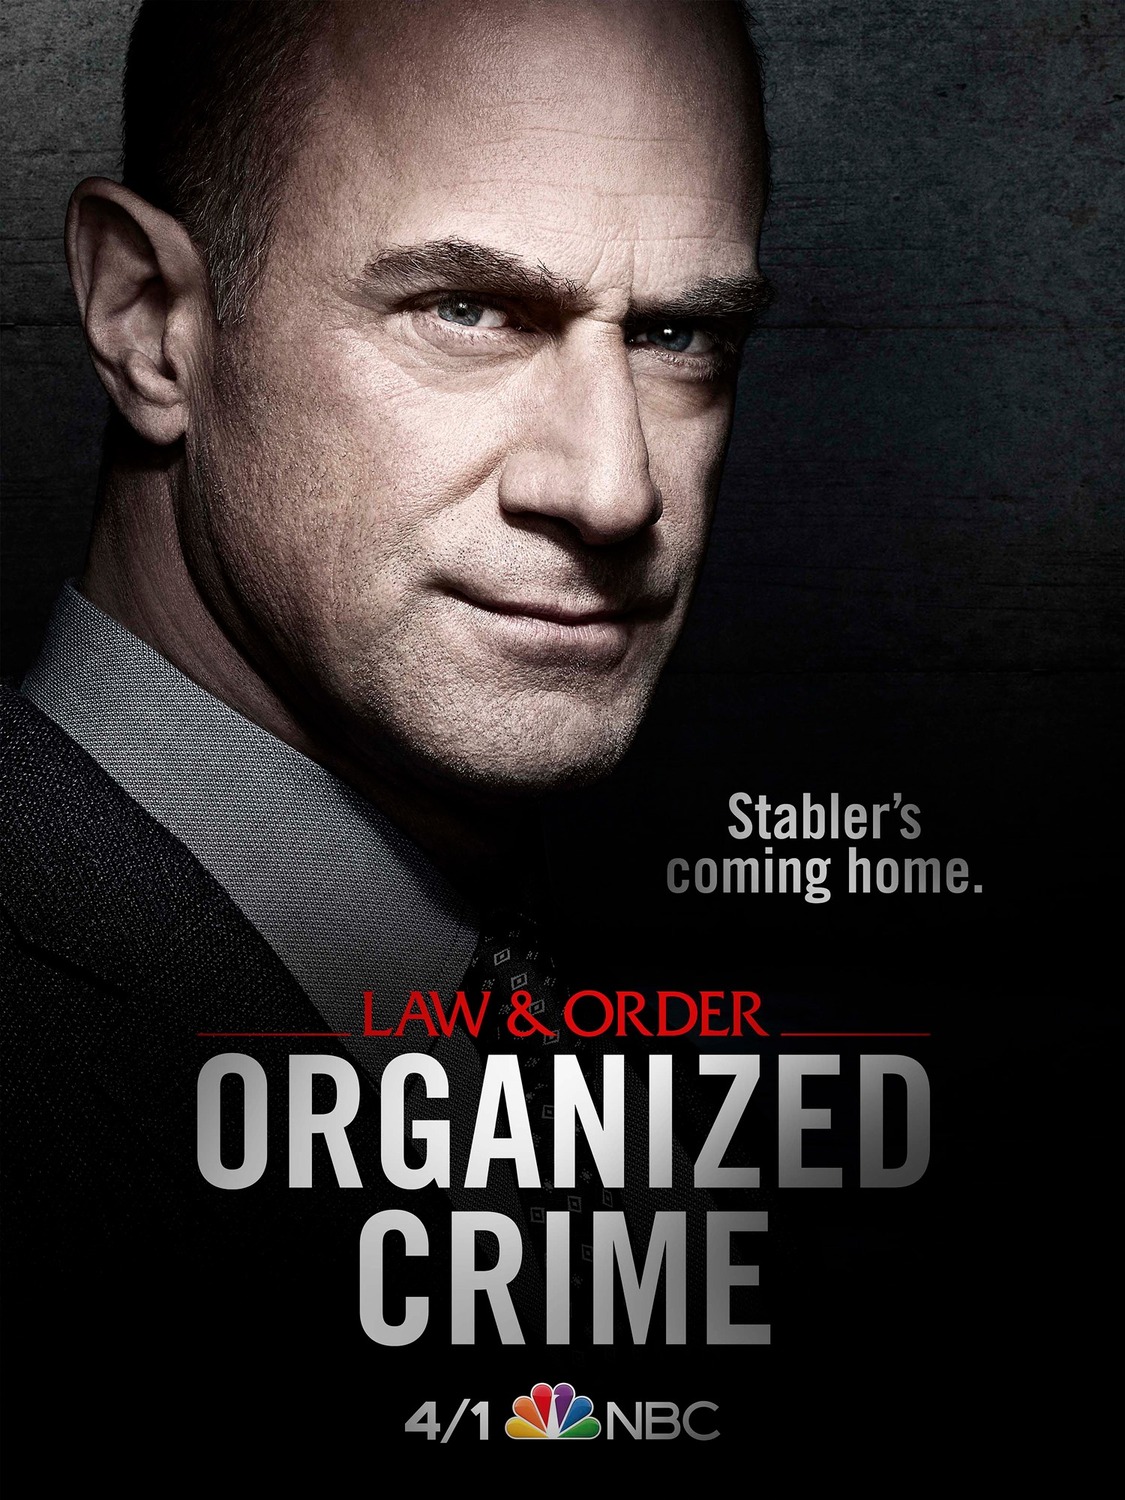 Extra Large TV Poster Image for Law & Order: Organized Crime 